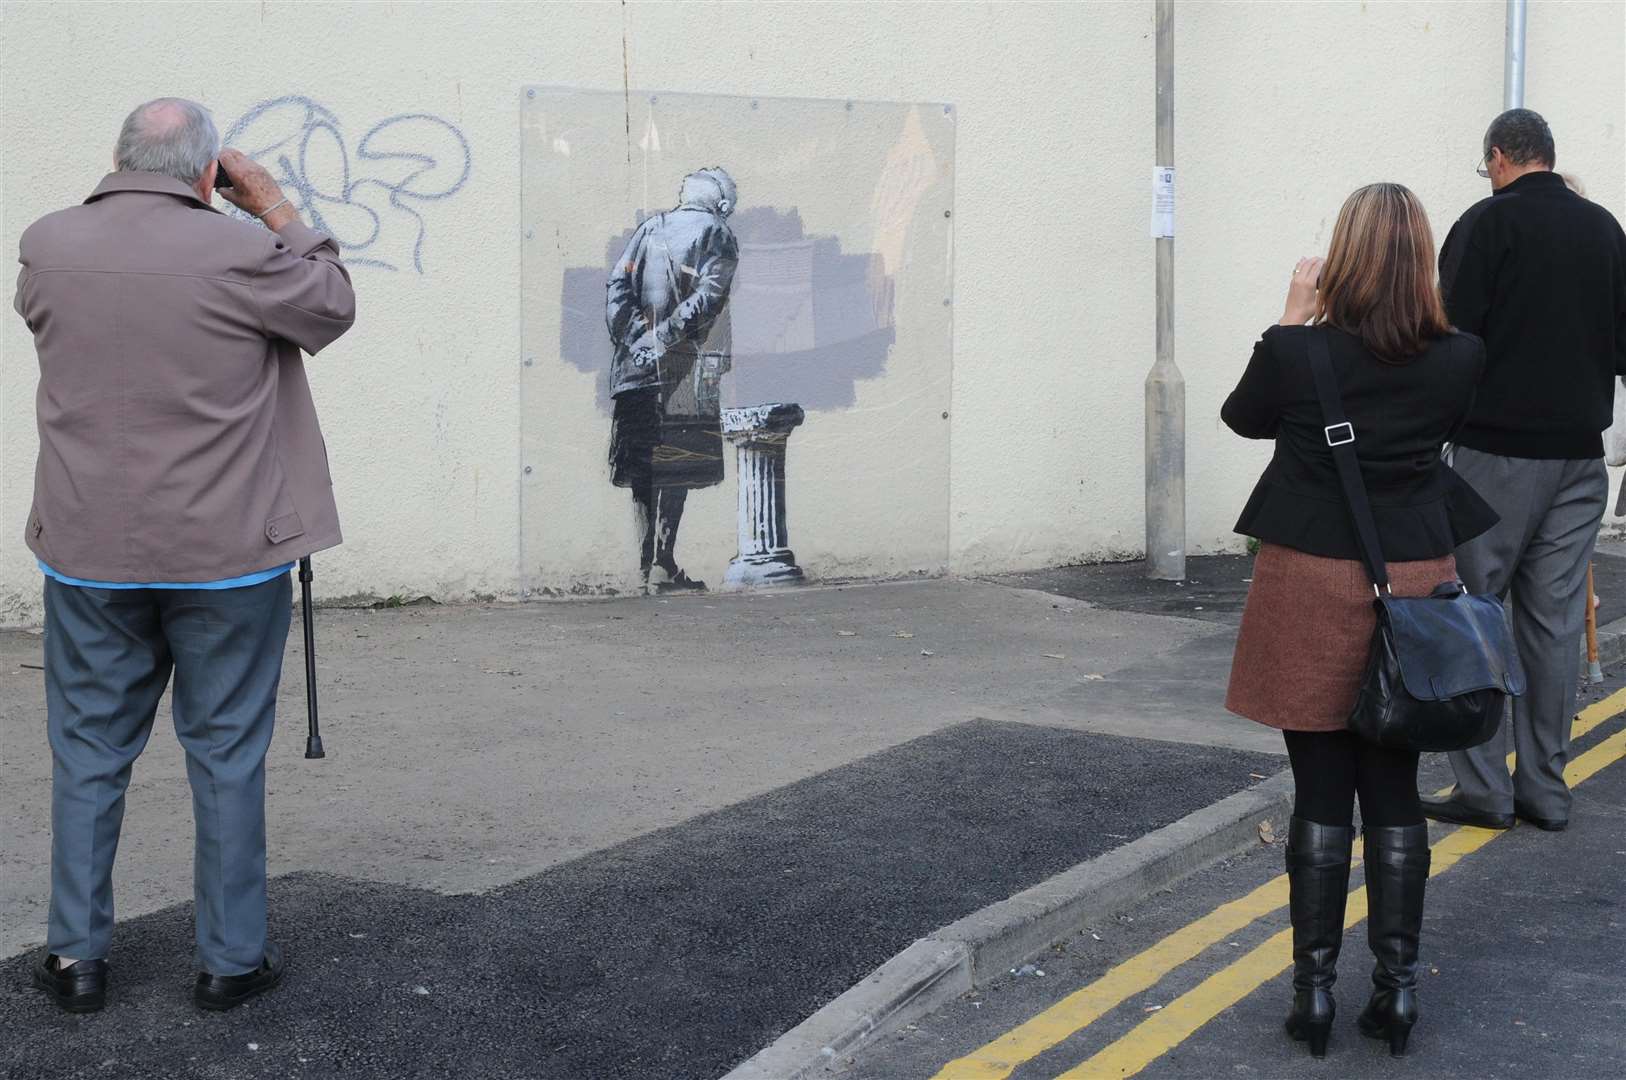 The Banksy artwork in Folkestone was given protective framing. Picture: Wayne McCabe